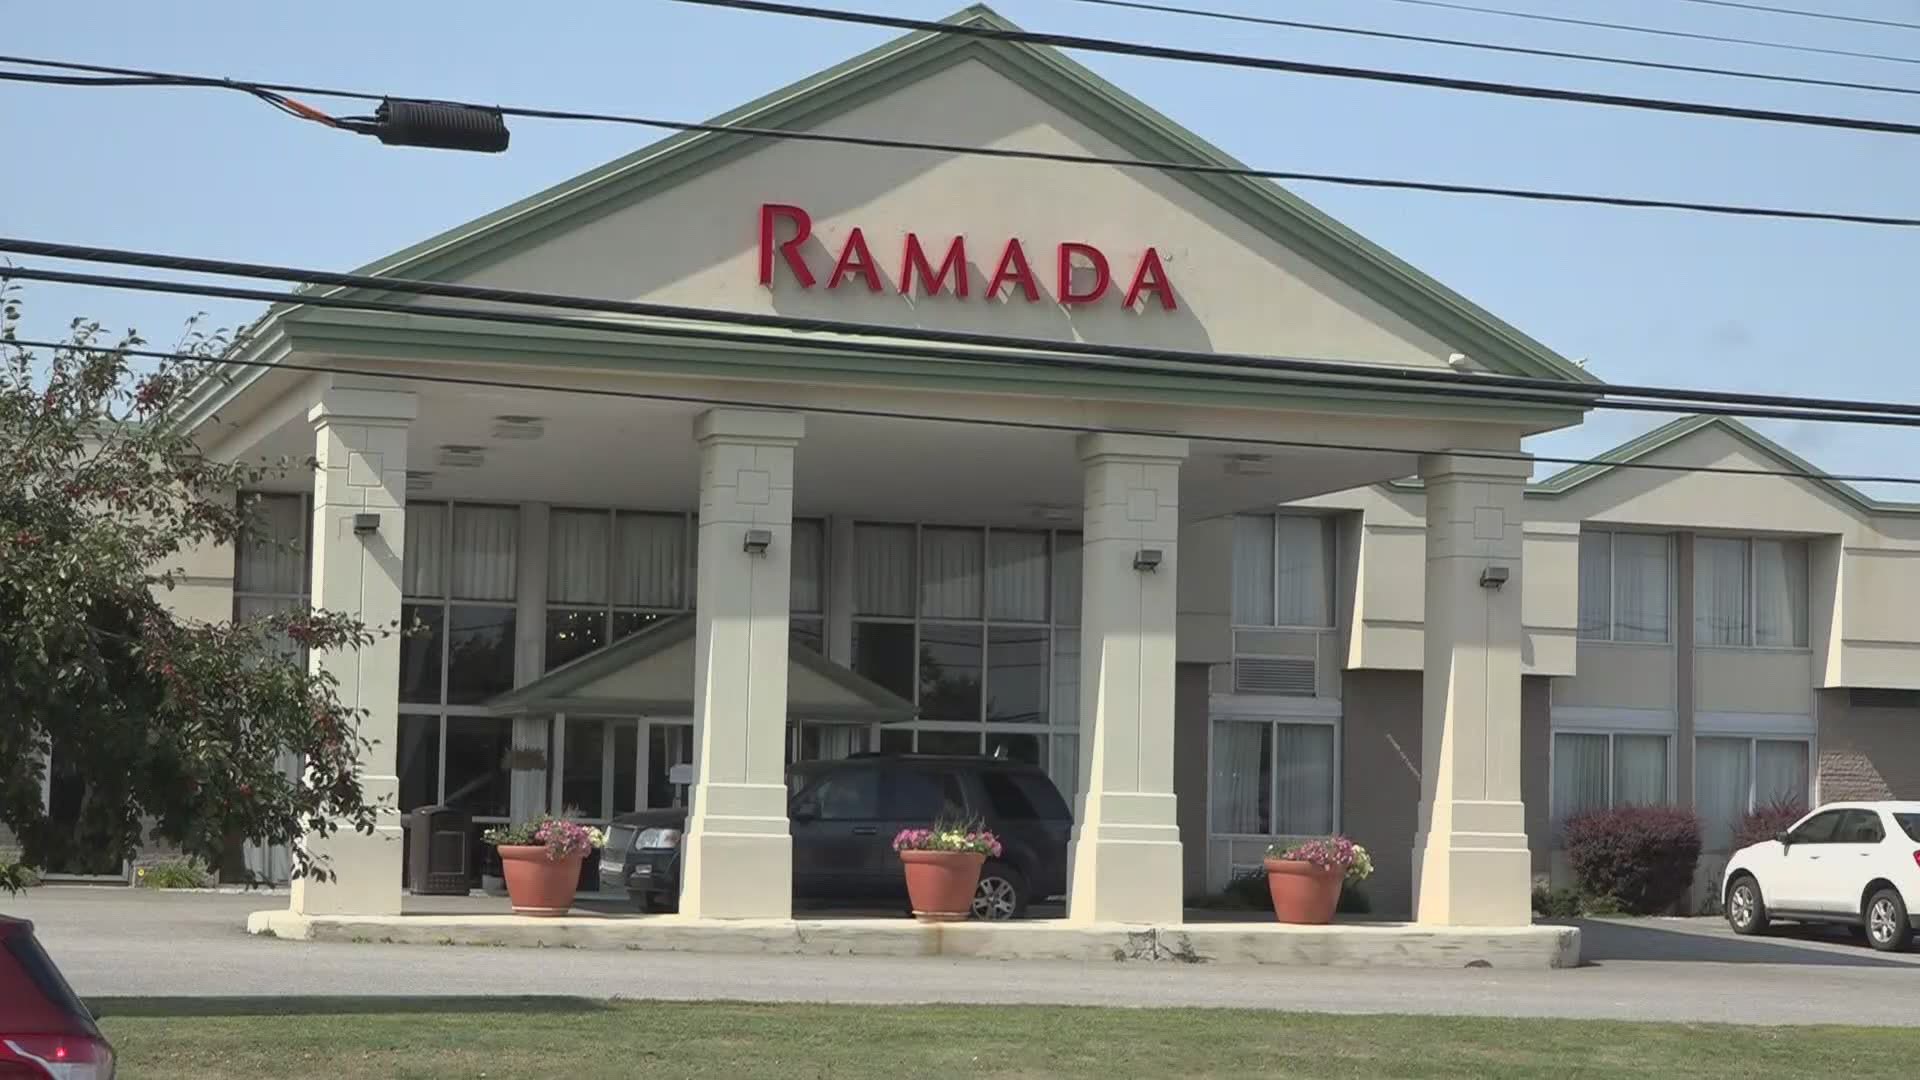 The Maine State Housing Authority is leasing the Ramada Inn on Odlin Road in Bangor to serve as a homeless shelter for Penobscot Community Health Care.